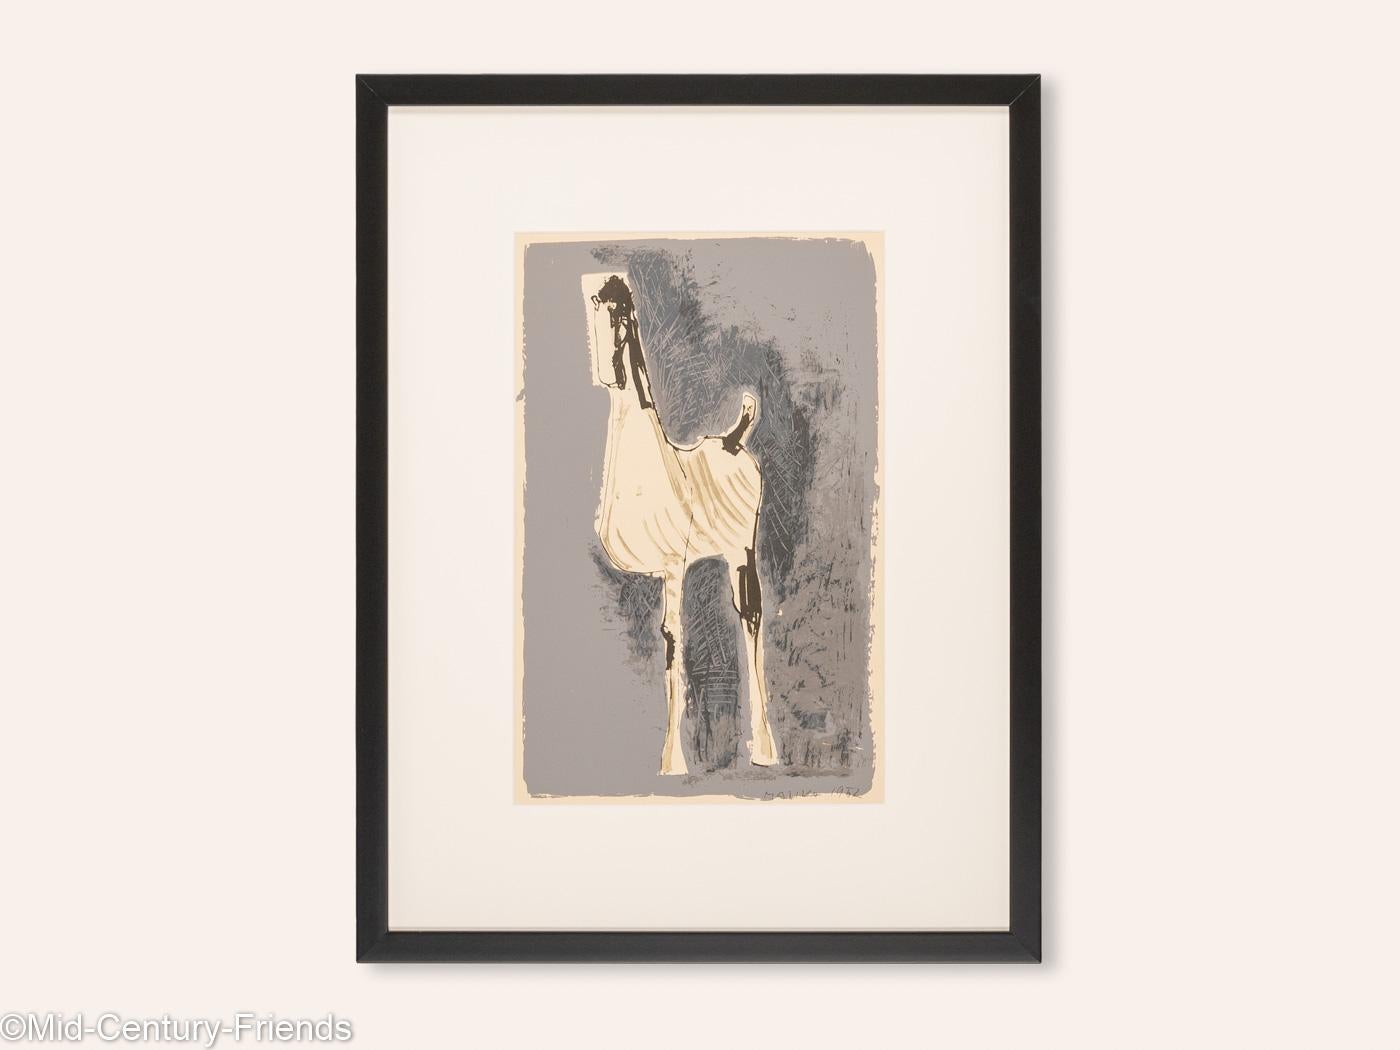 Marino MARINI graphic art showing a horse. Original Dietz-Replica in different colors from the 1960s. Signed and dated in the print. Color screen printing on thick paper. Ready to hang, framed with a black passepartout in a real wood picture frame